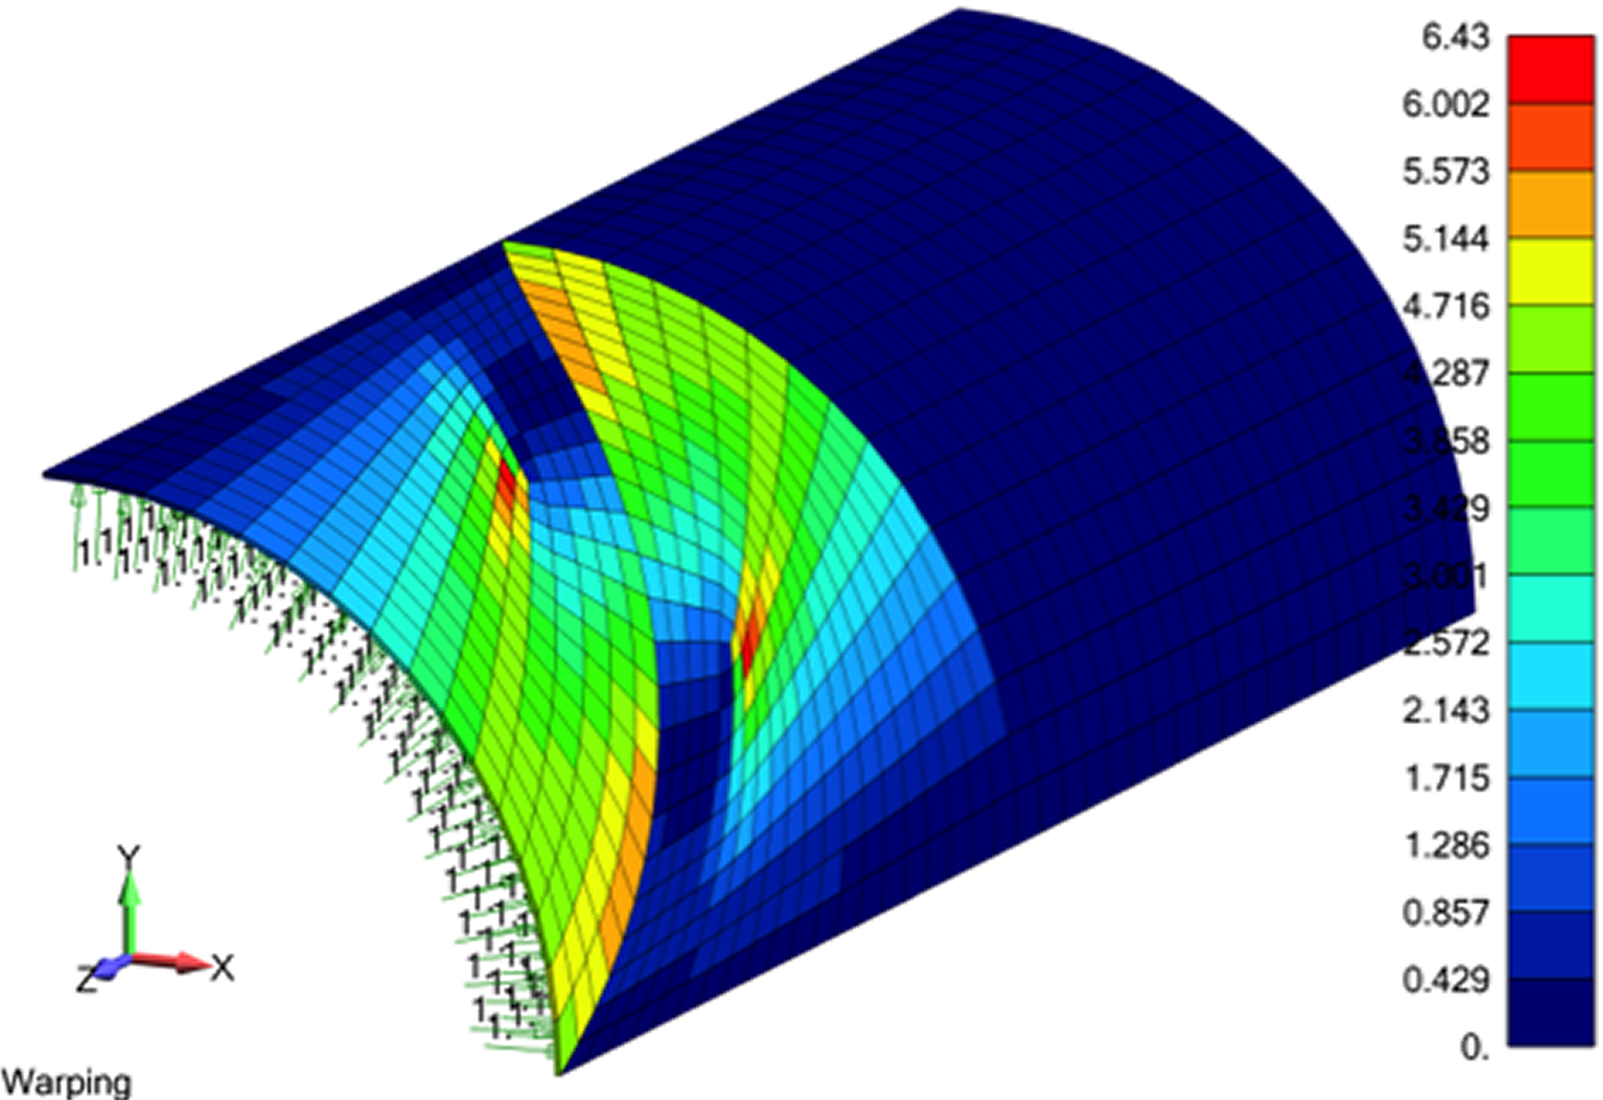 LS-DYNA: Observations on Explicit Meshing